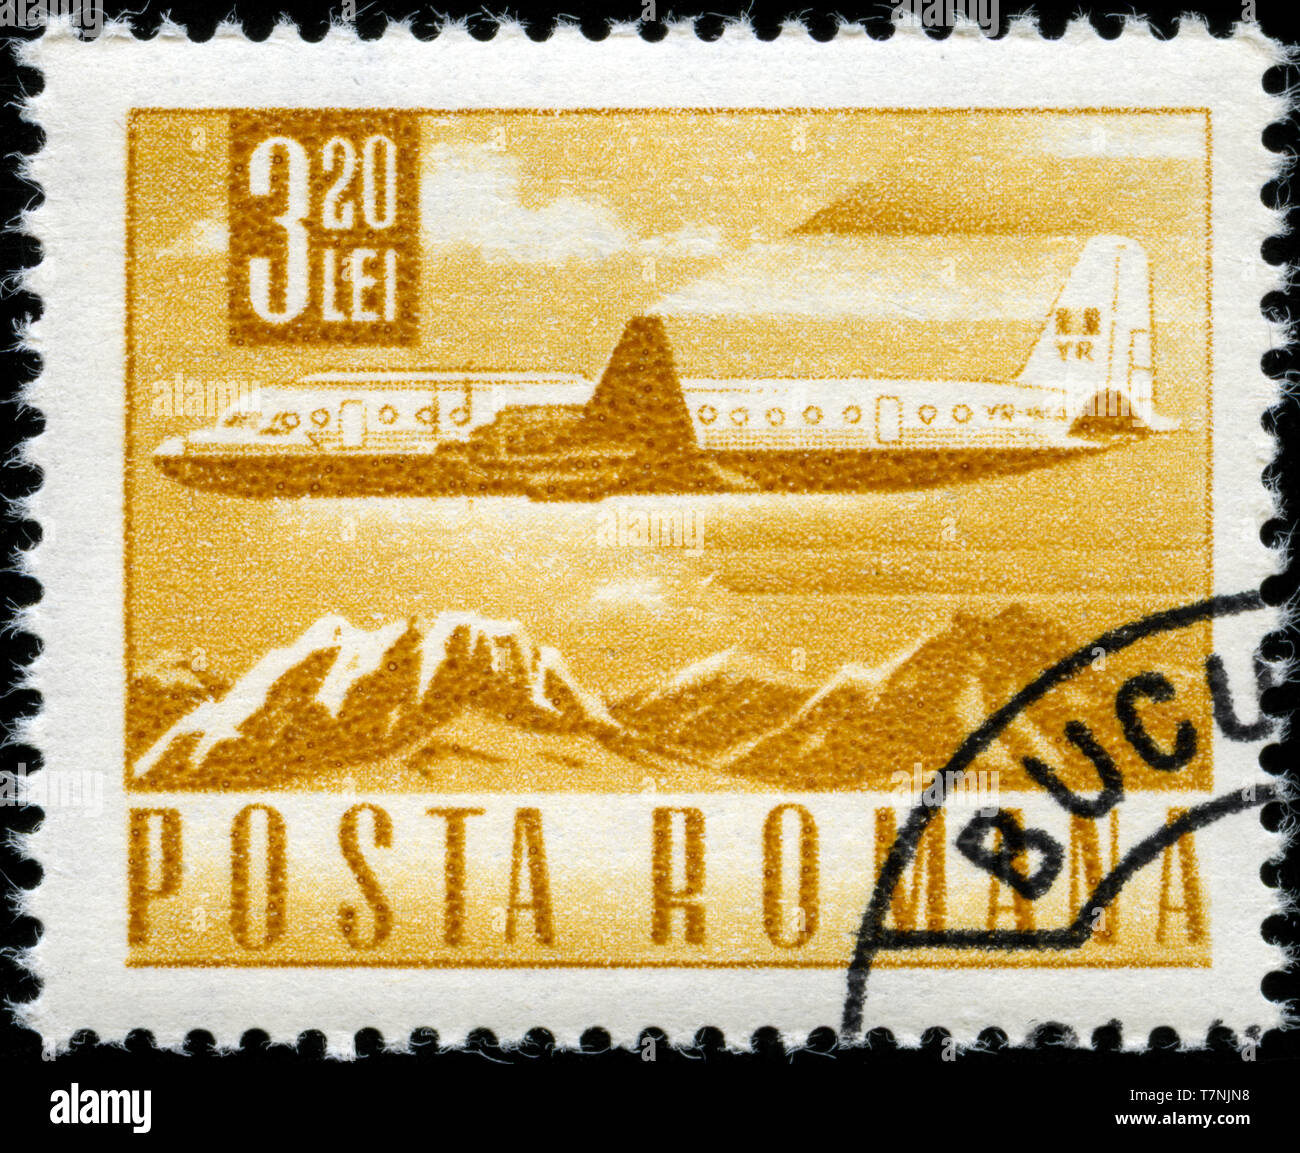 Postage stamp from Romania in the Postal and Transport series issued in 1968 Stock Photo